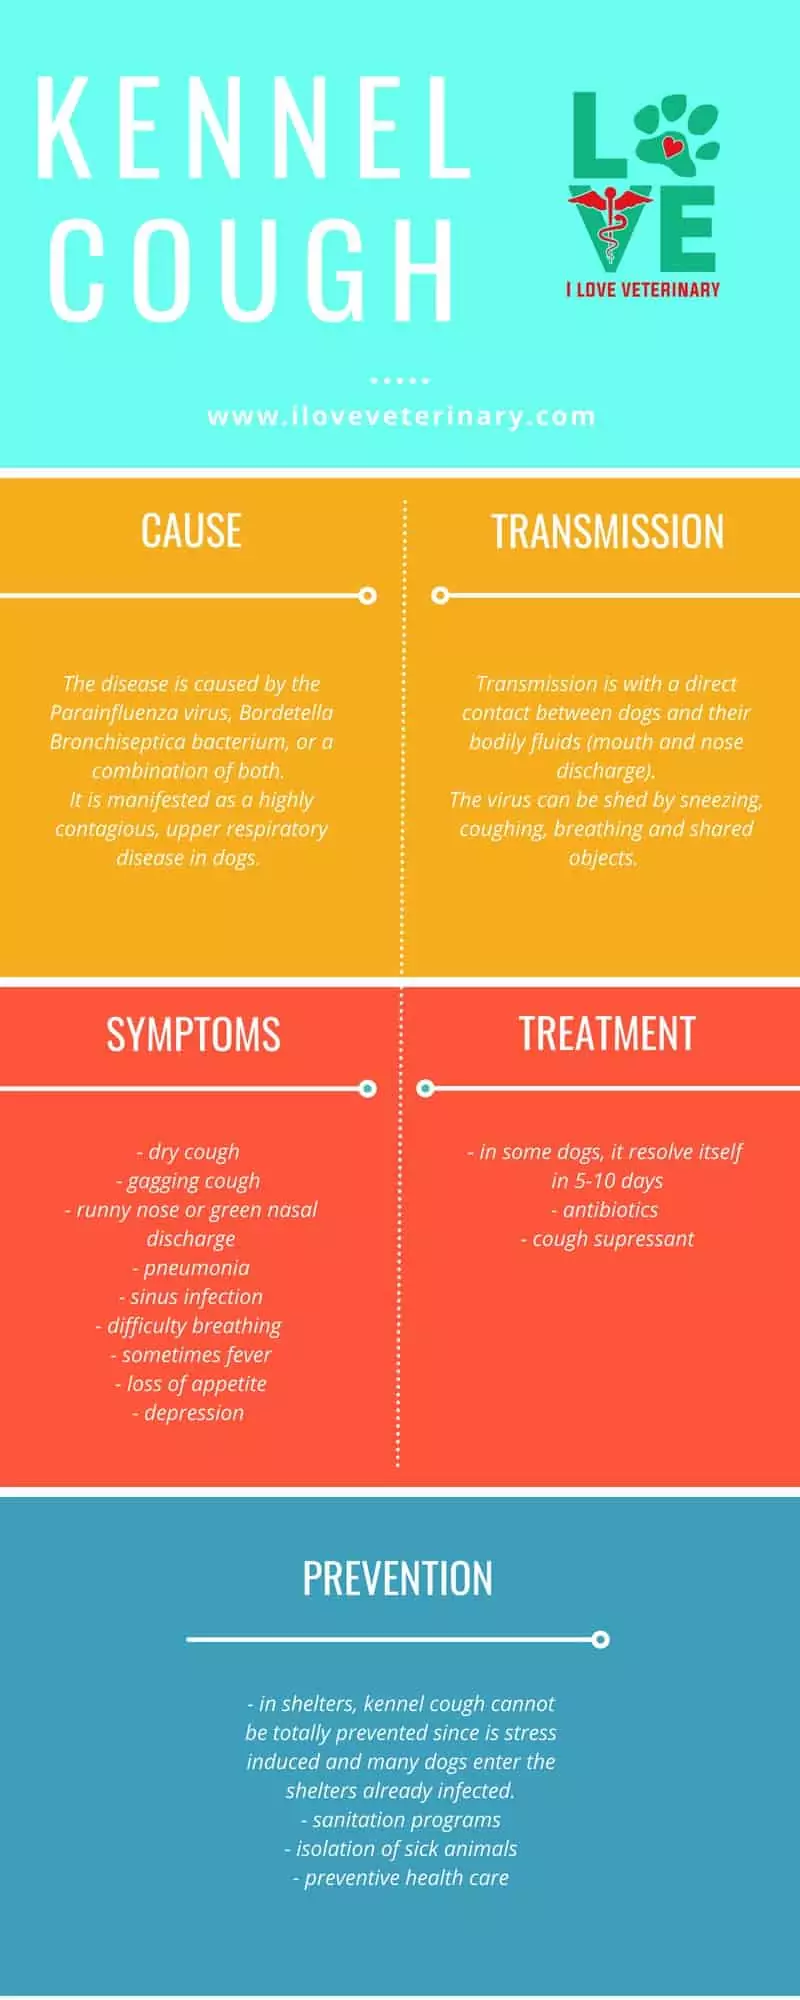 kennel cough infographic 